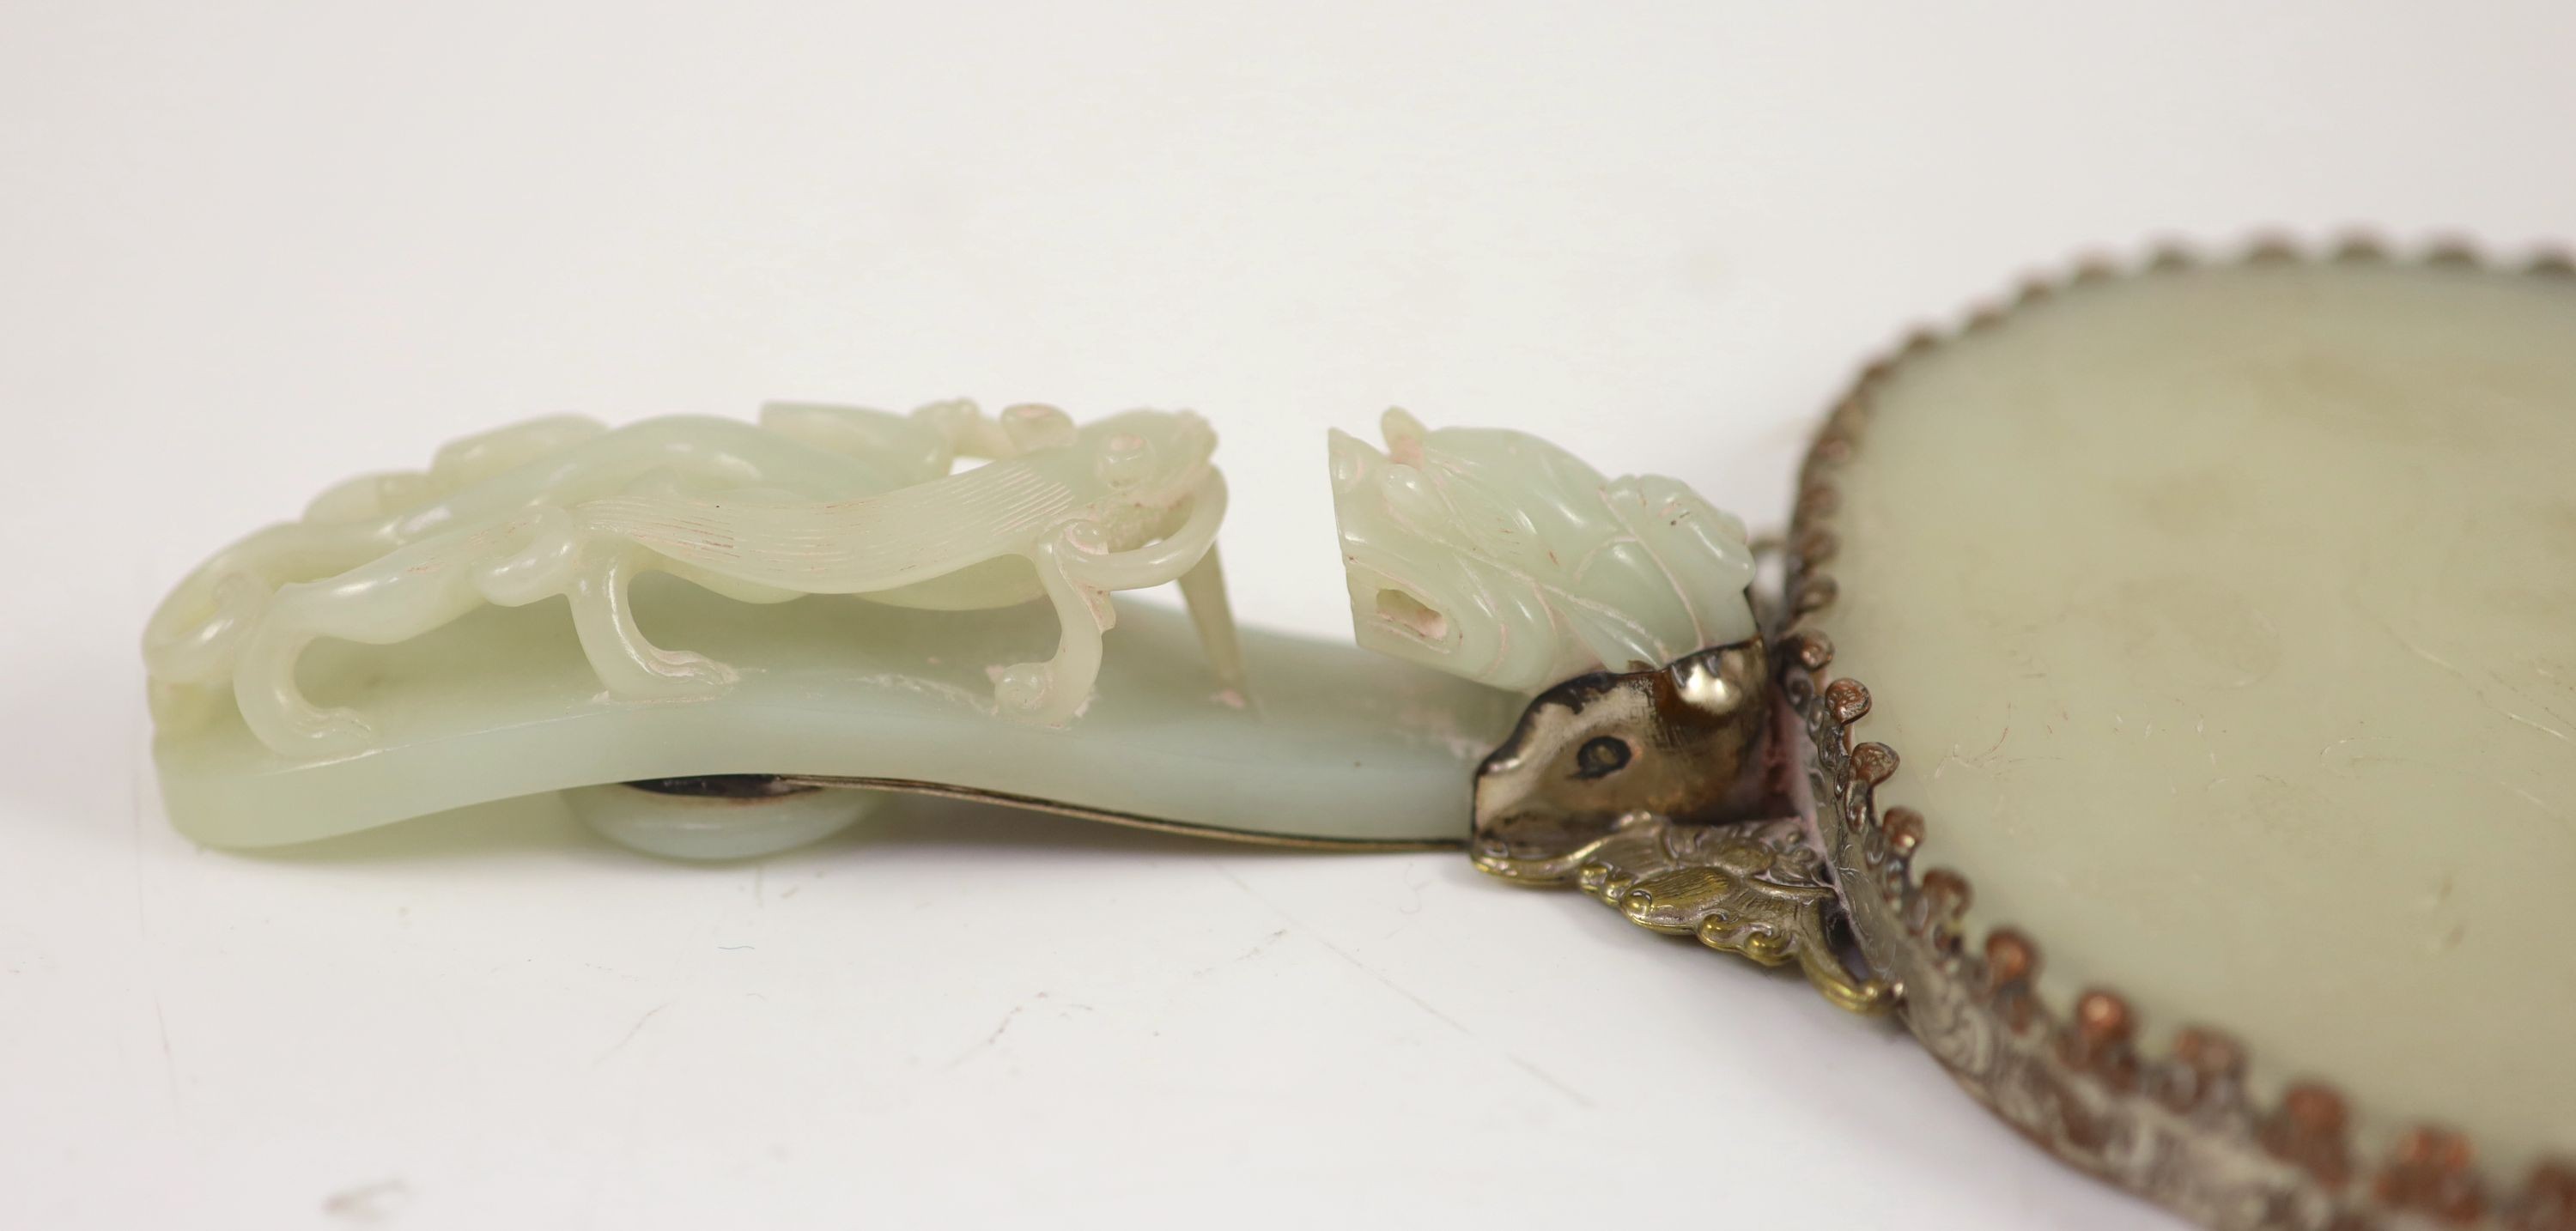 A Chinese pale celadon jade mounted hand mirror, the jade 18th/19th century, 24.2cm long, plaque 13.2 x 11.5cm, belt hook handle 12.3cm